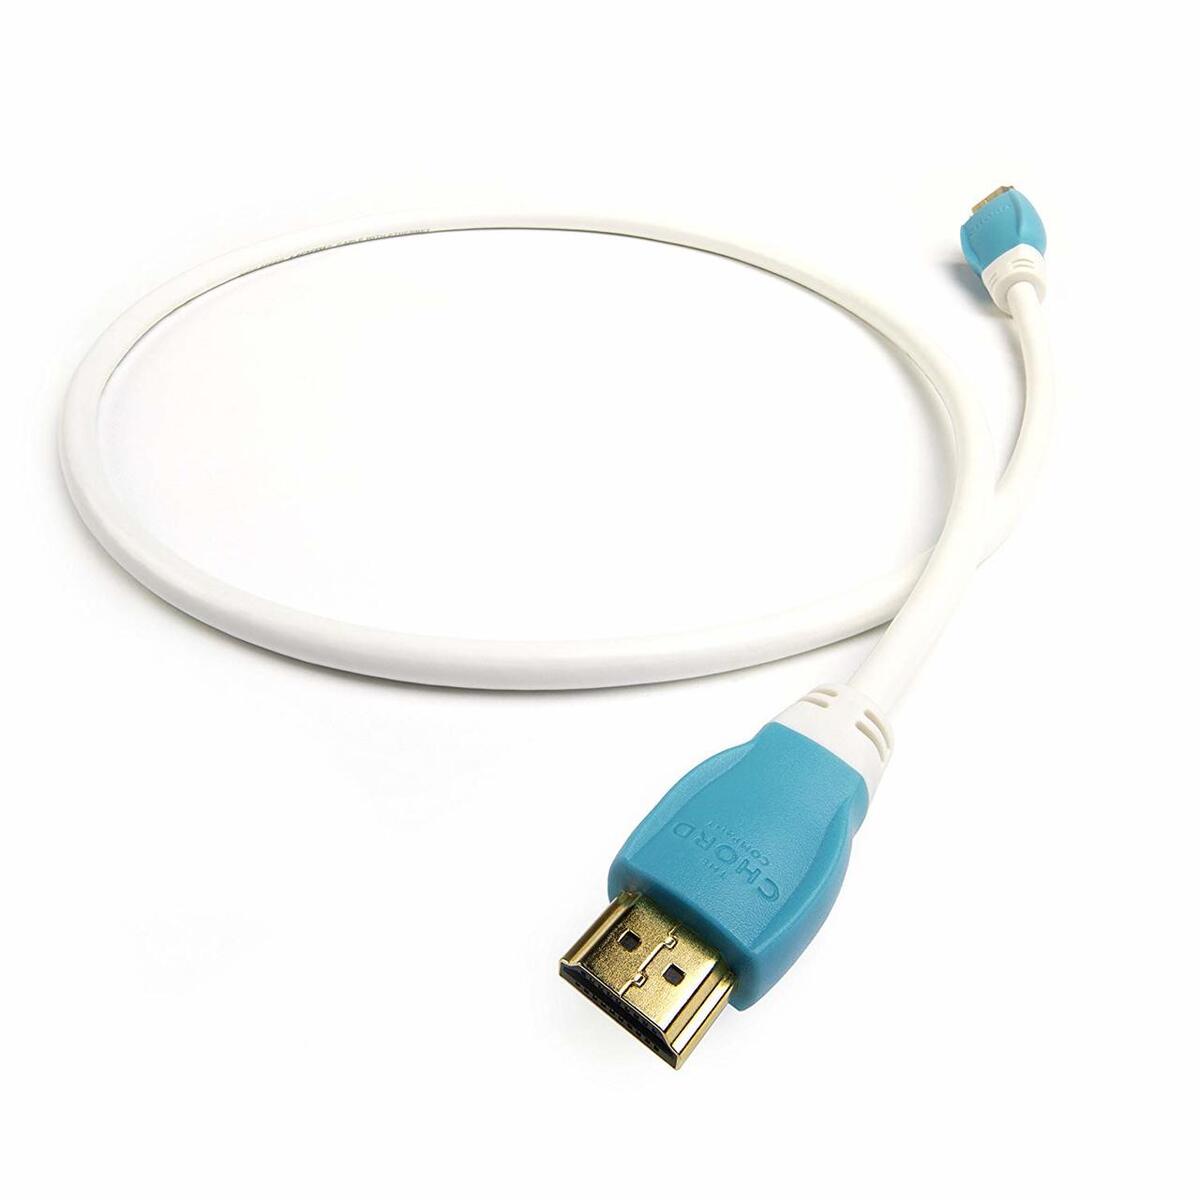 The CHORD HDMI Advance High Speed with Ethernet, 2 